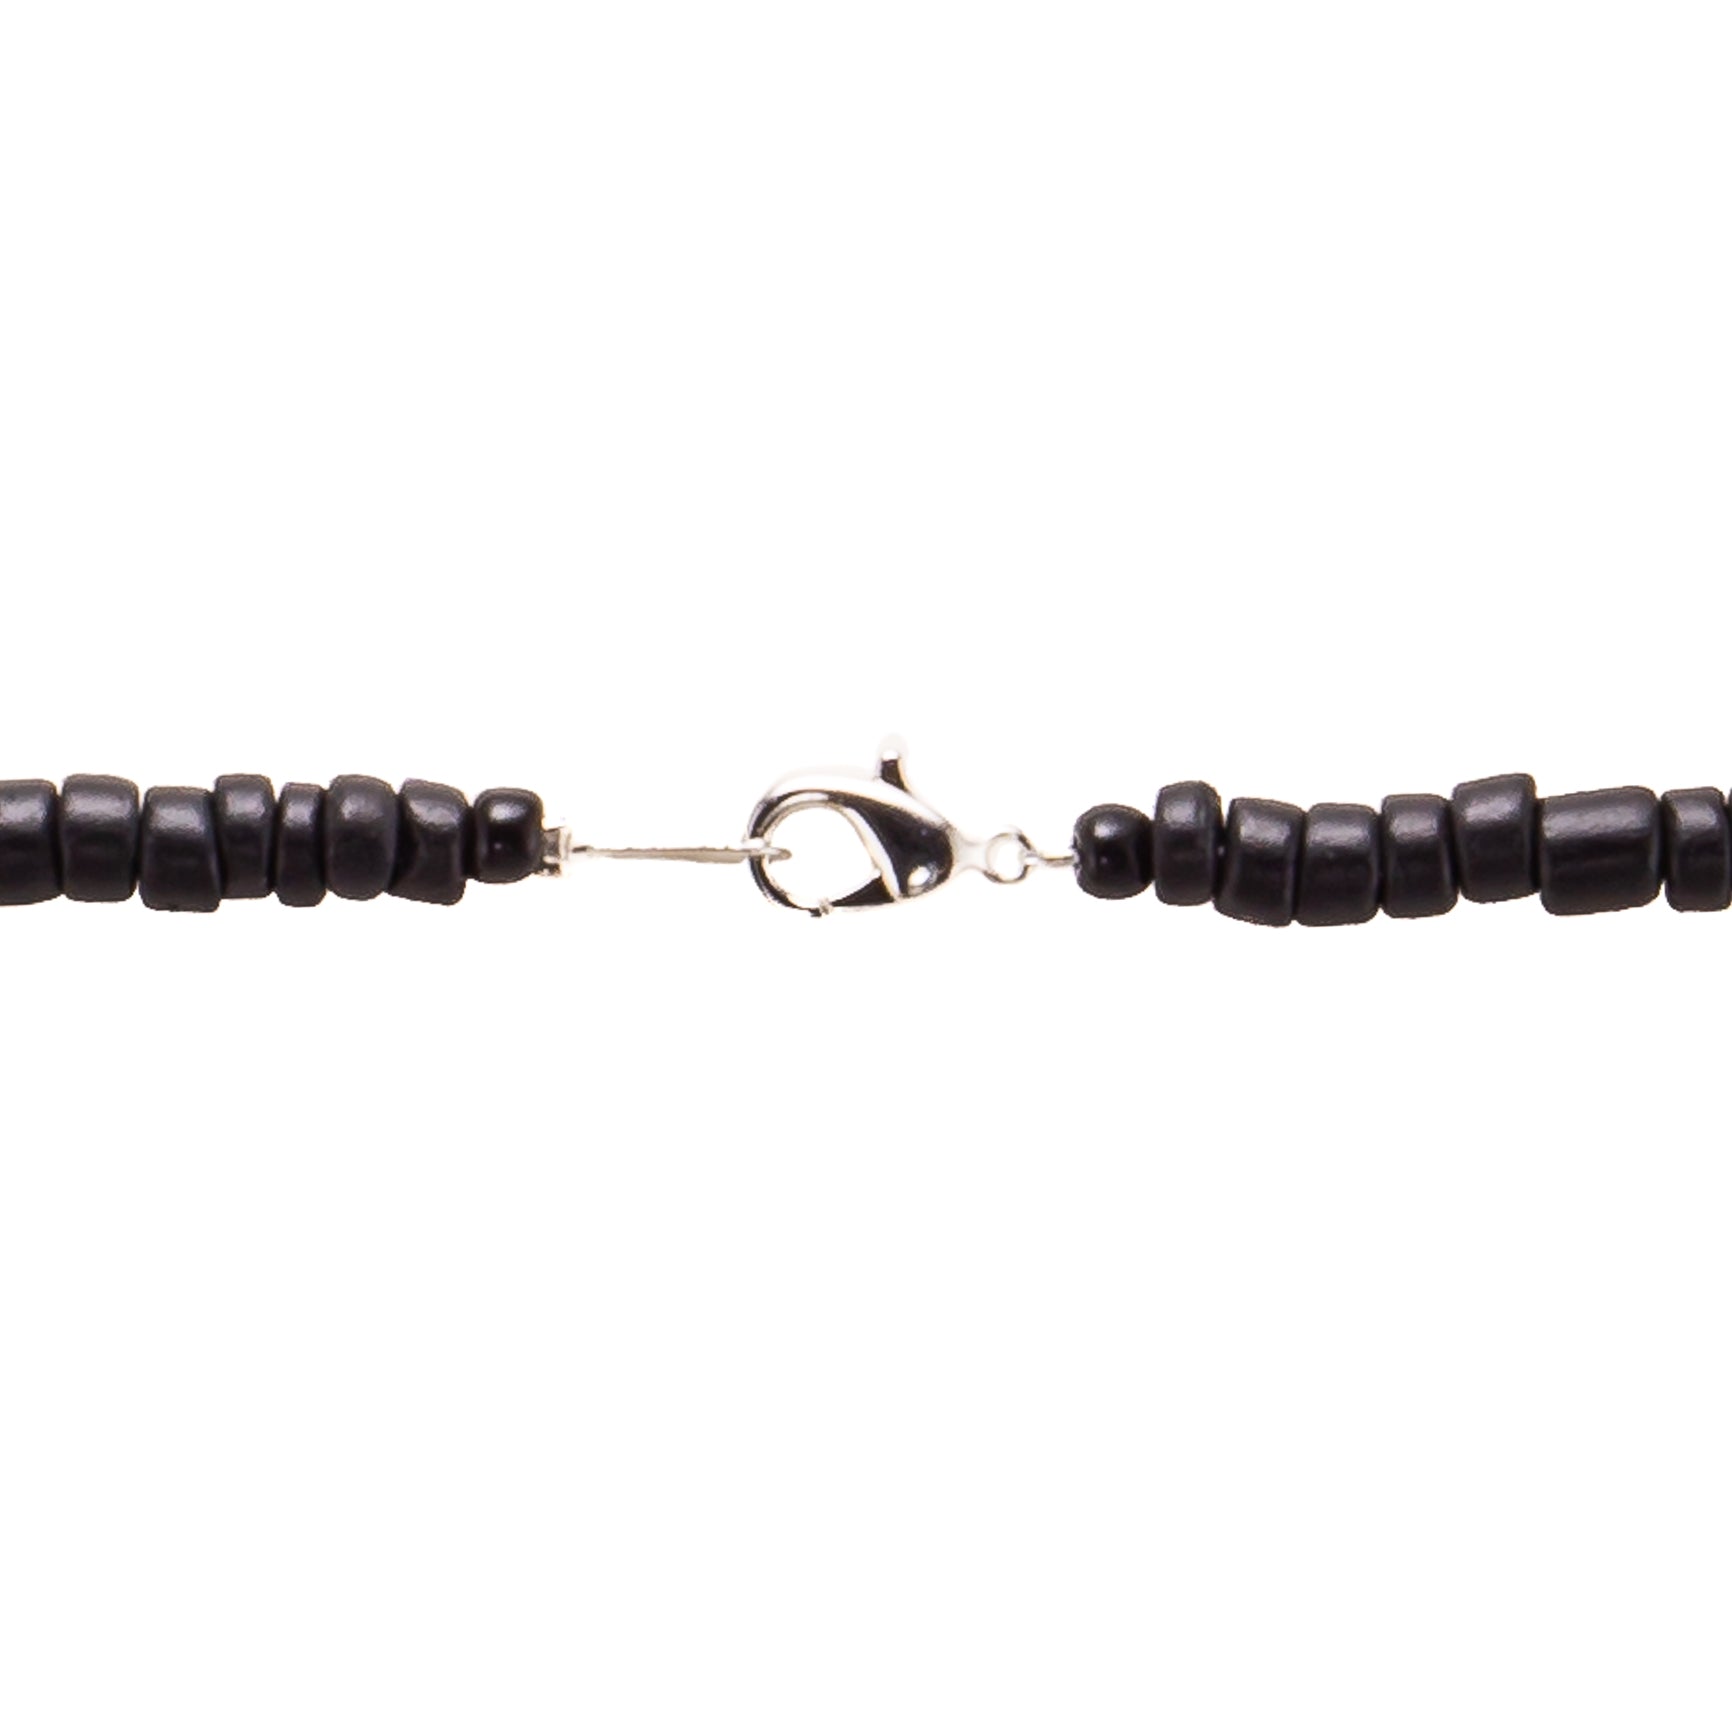 Wood Surfboard Pendant on Black Coconut Beads Necklace